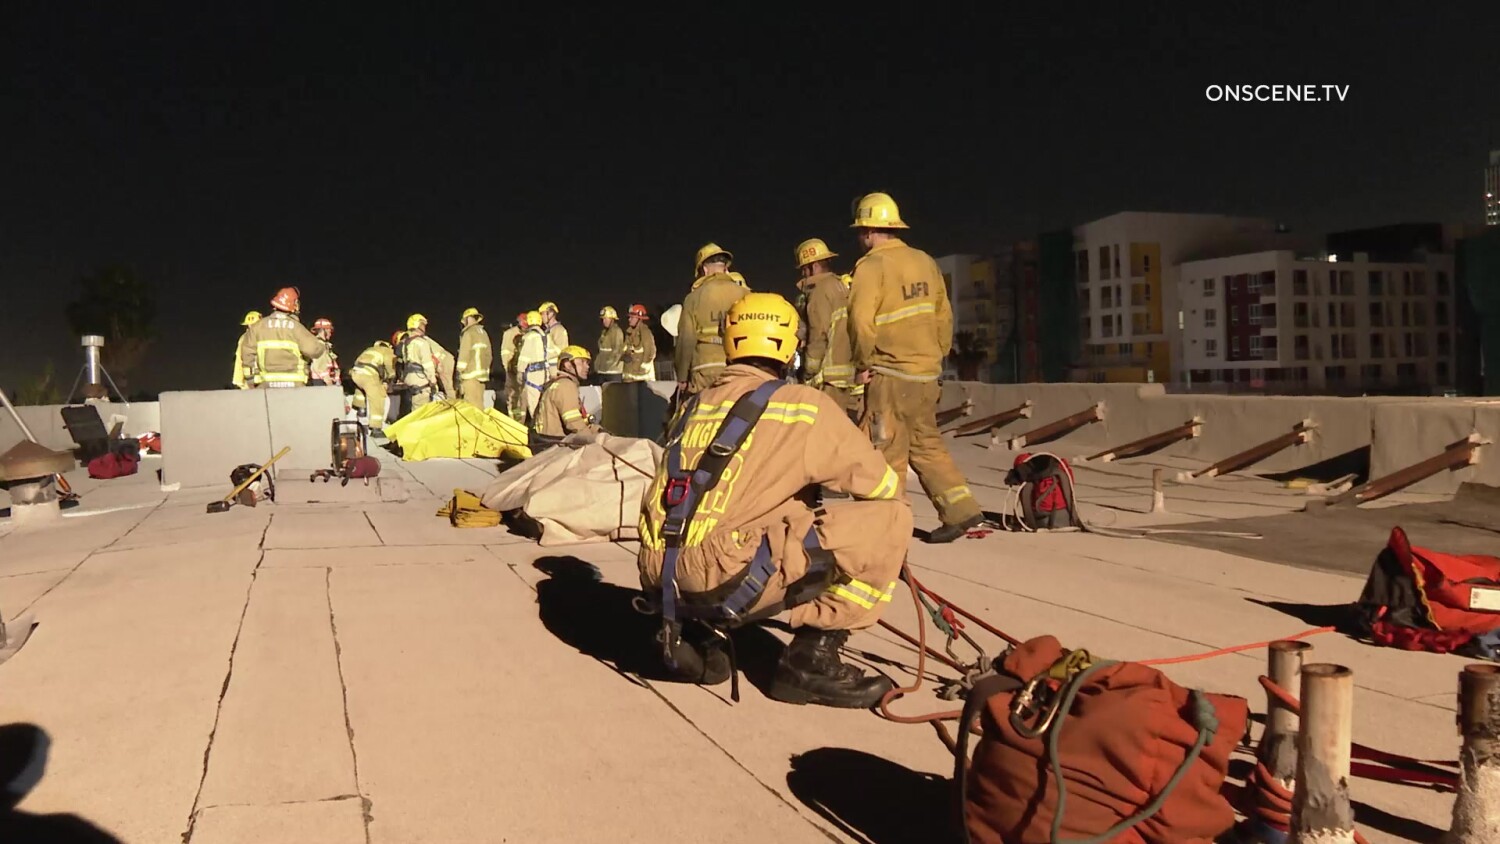 Firefighters rescue woman from trash chute in Koreatown 